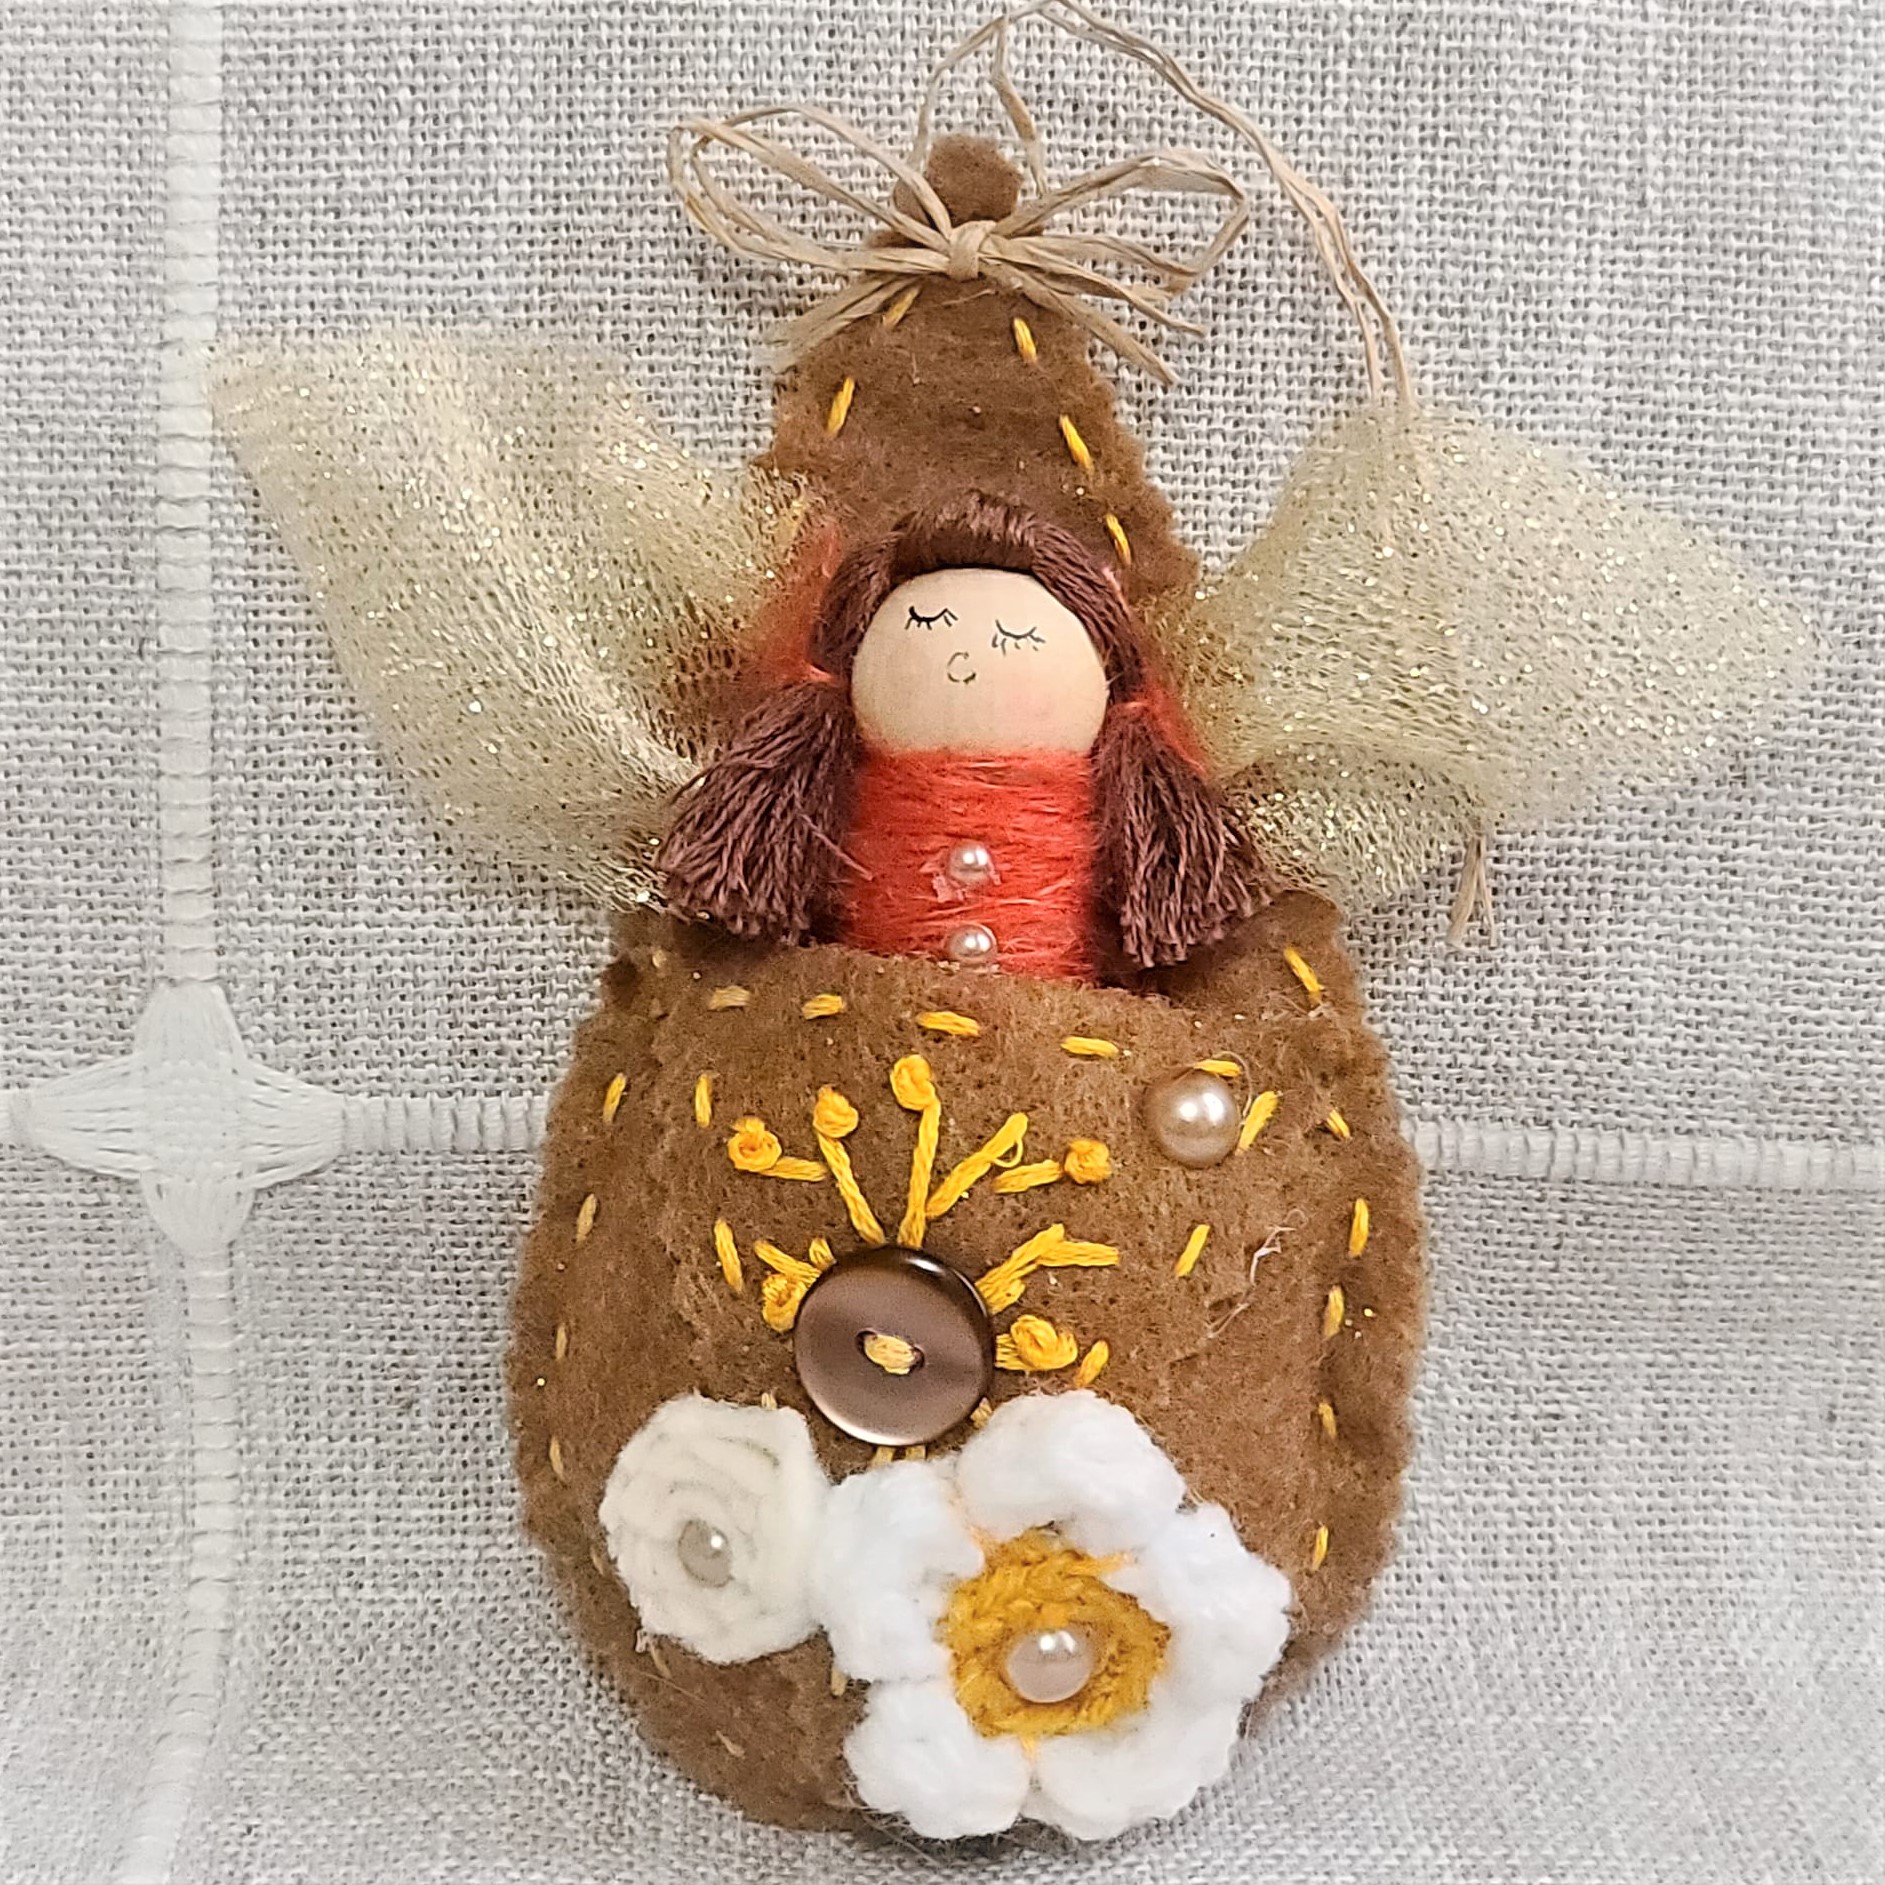 Pod babies whimsical ornament - red head girl in brown pod